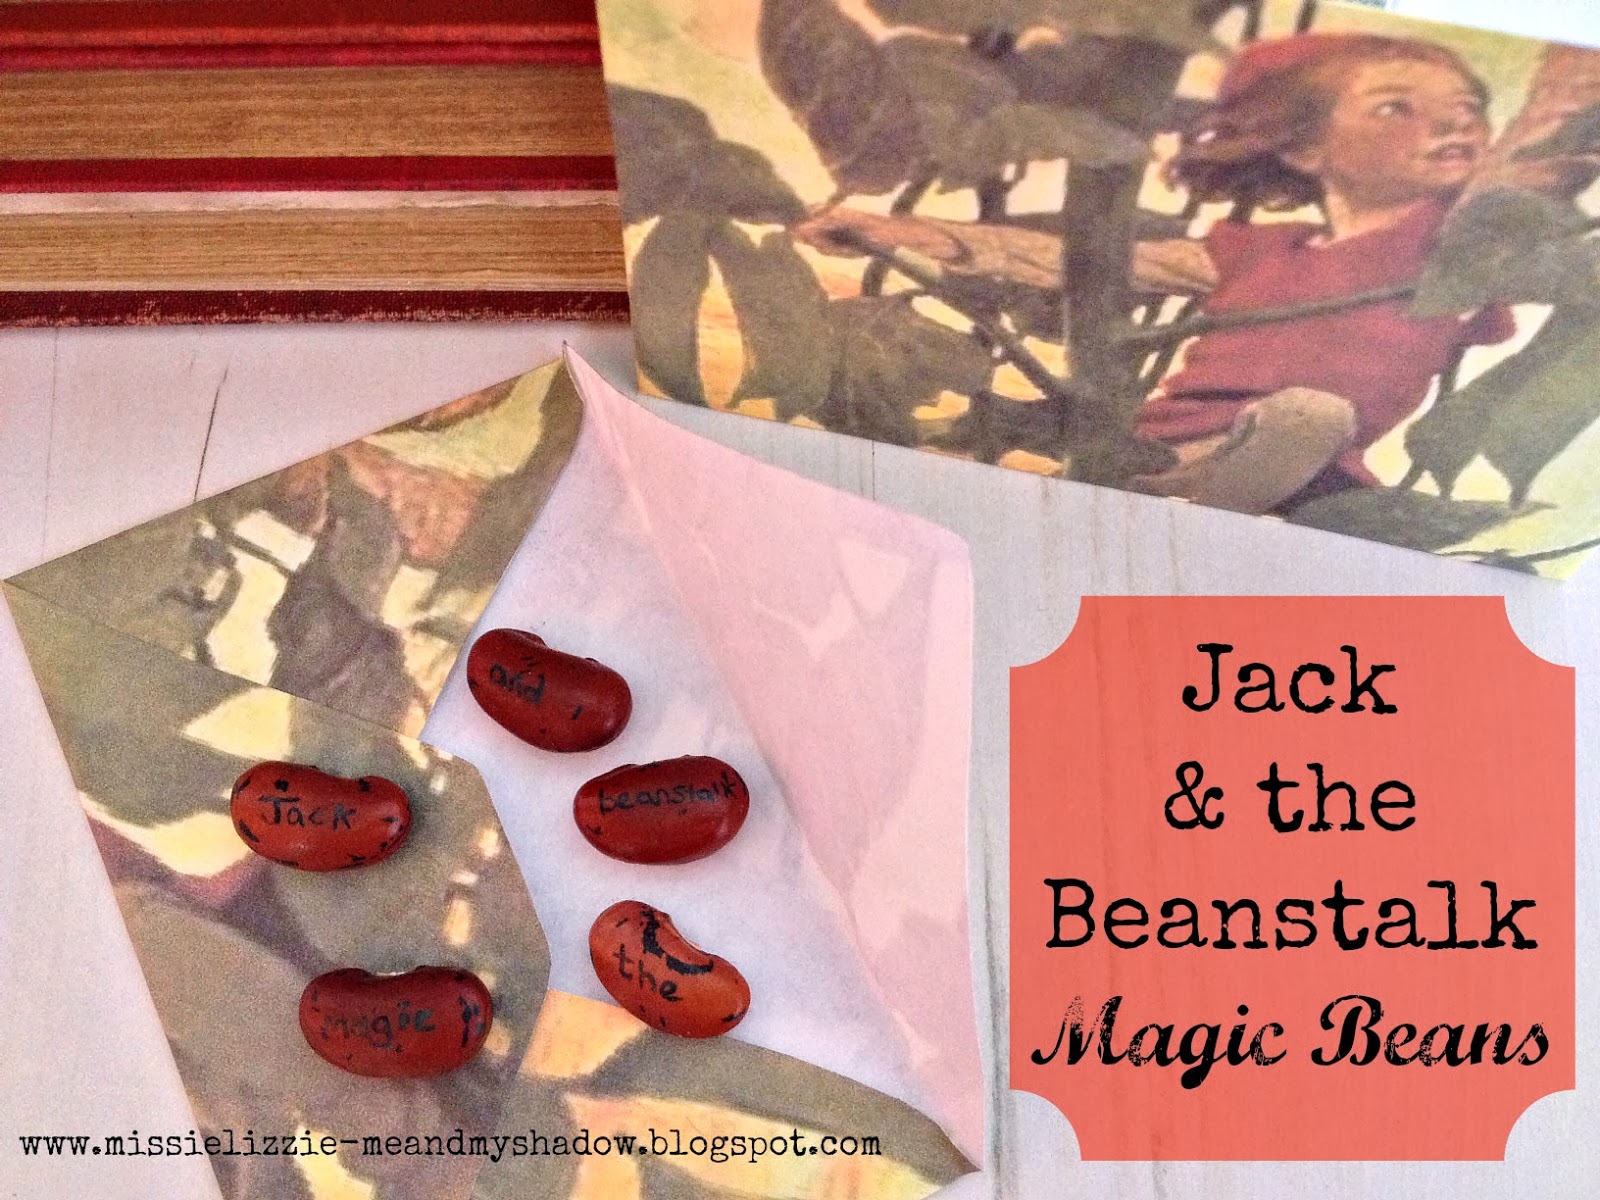 Me and my shadow: Fairy Tale Crafts - Jack and the Beanstalk Magic Beans